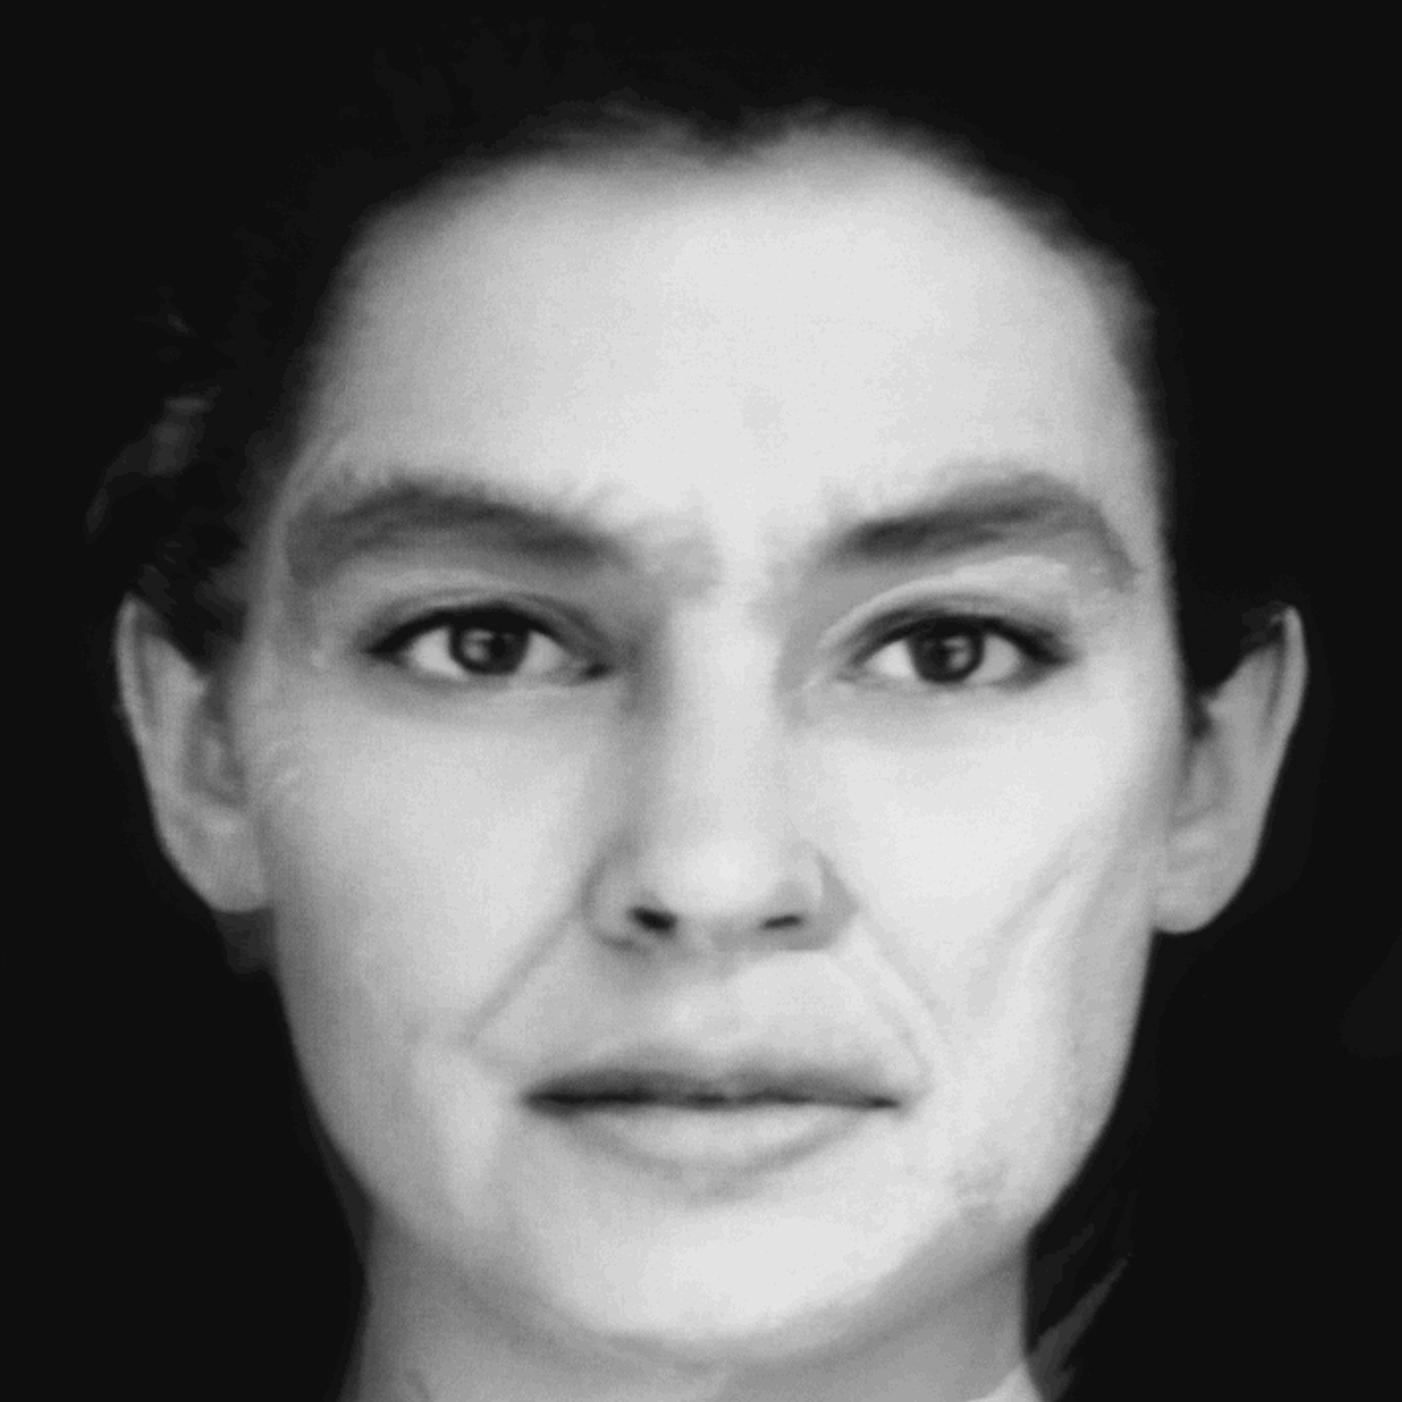 7 Morphs of 7 Morphed Faces, 2018 (images from 1980s and 1994)